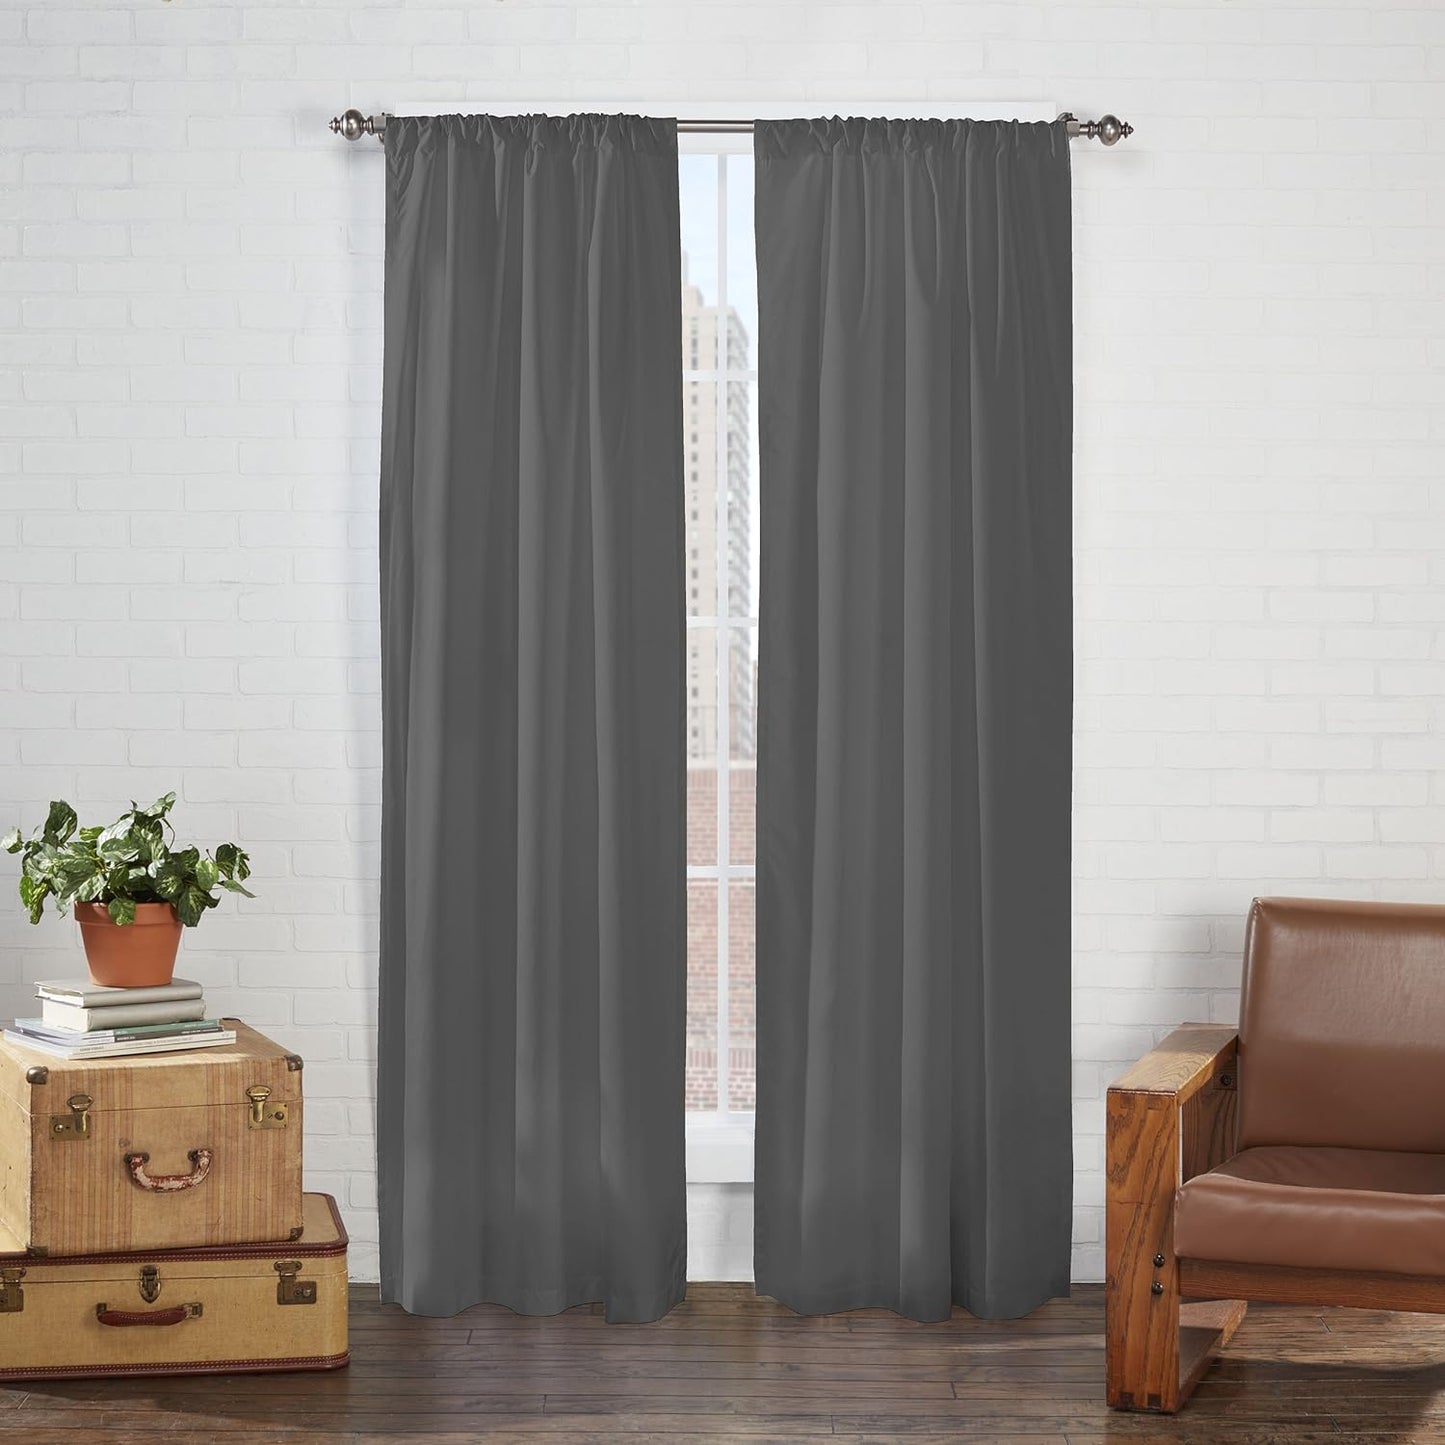 Pairs to Go Cadenza Modern Decorative Rod Pocket Window Curtains for Living Room (2 Panels), 40 in X 84 In, Teal  Keeco LLC Smoke 40 In X 54 In 